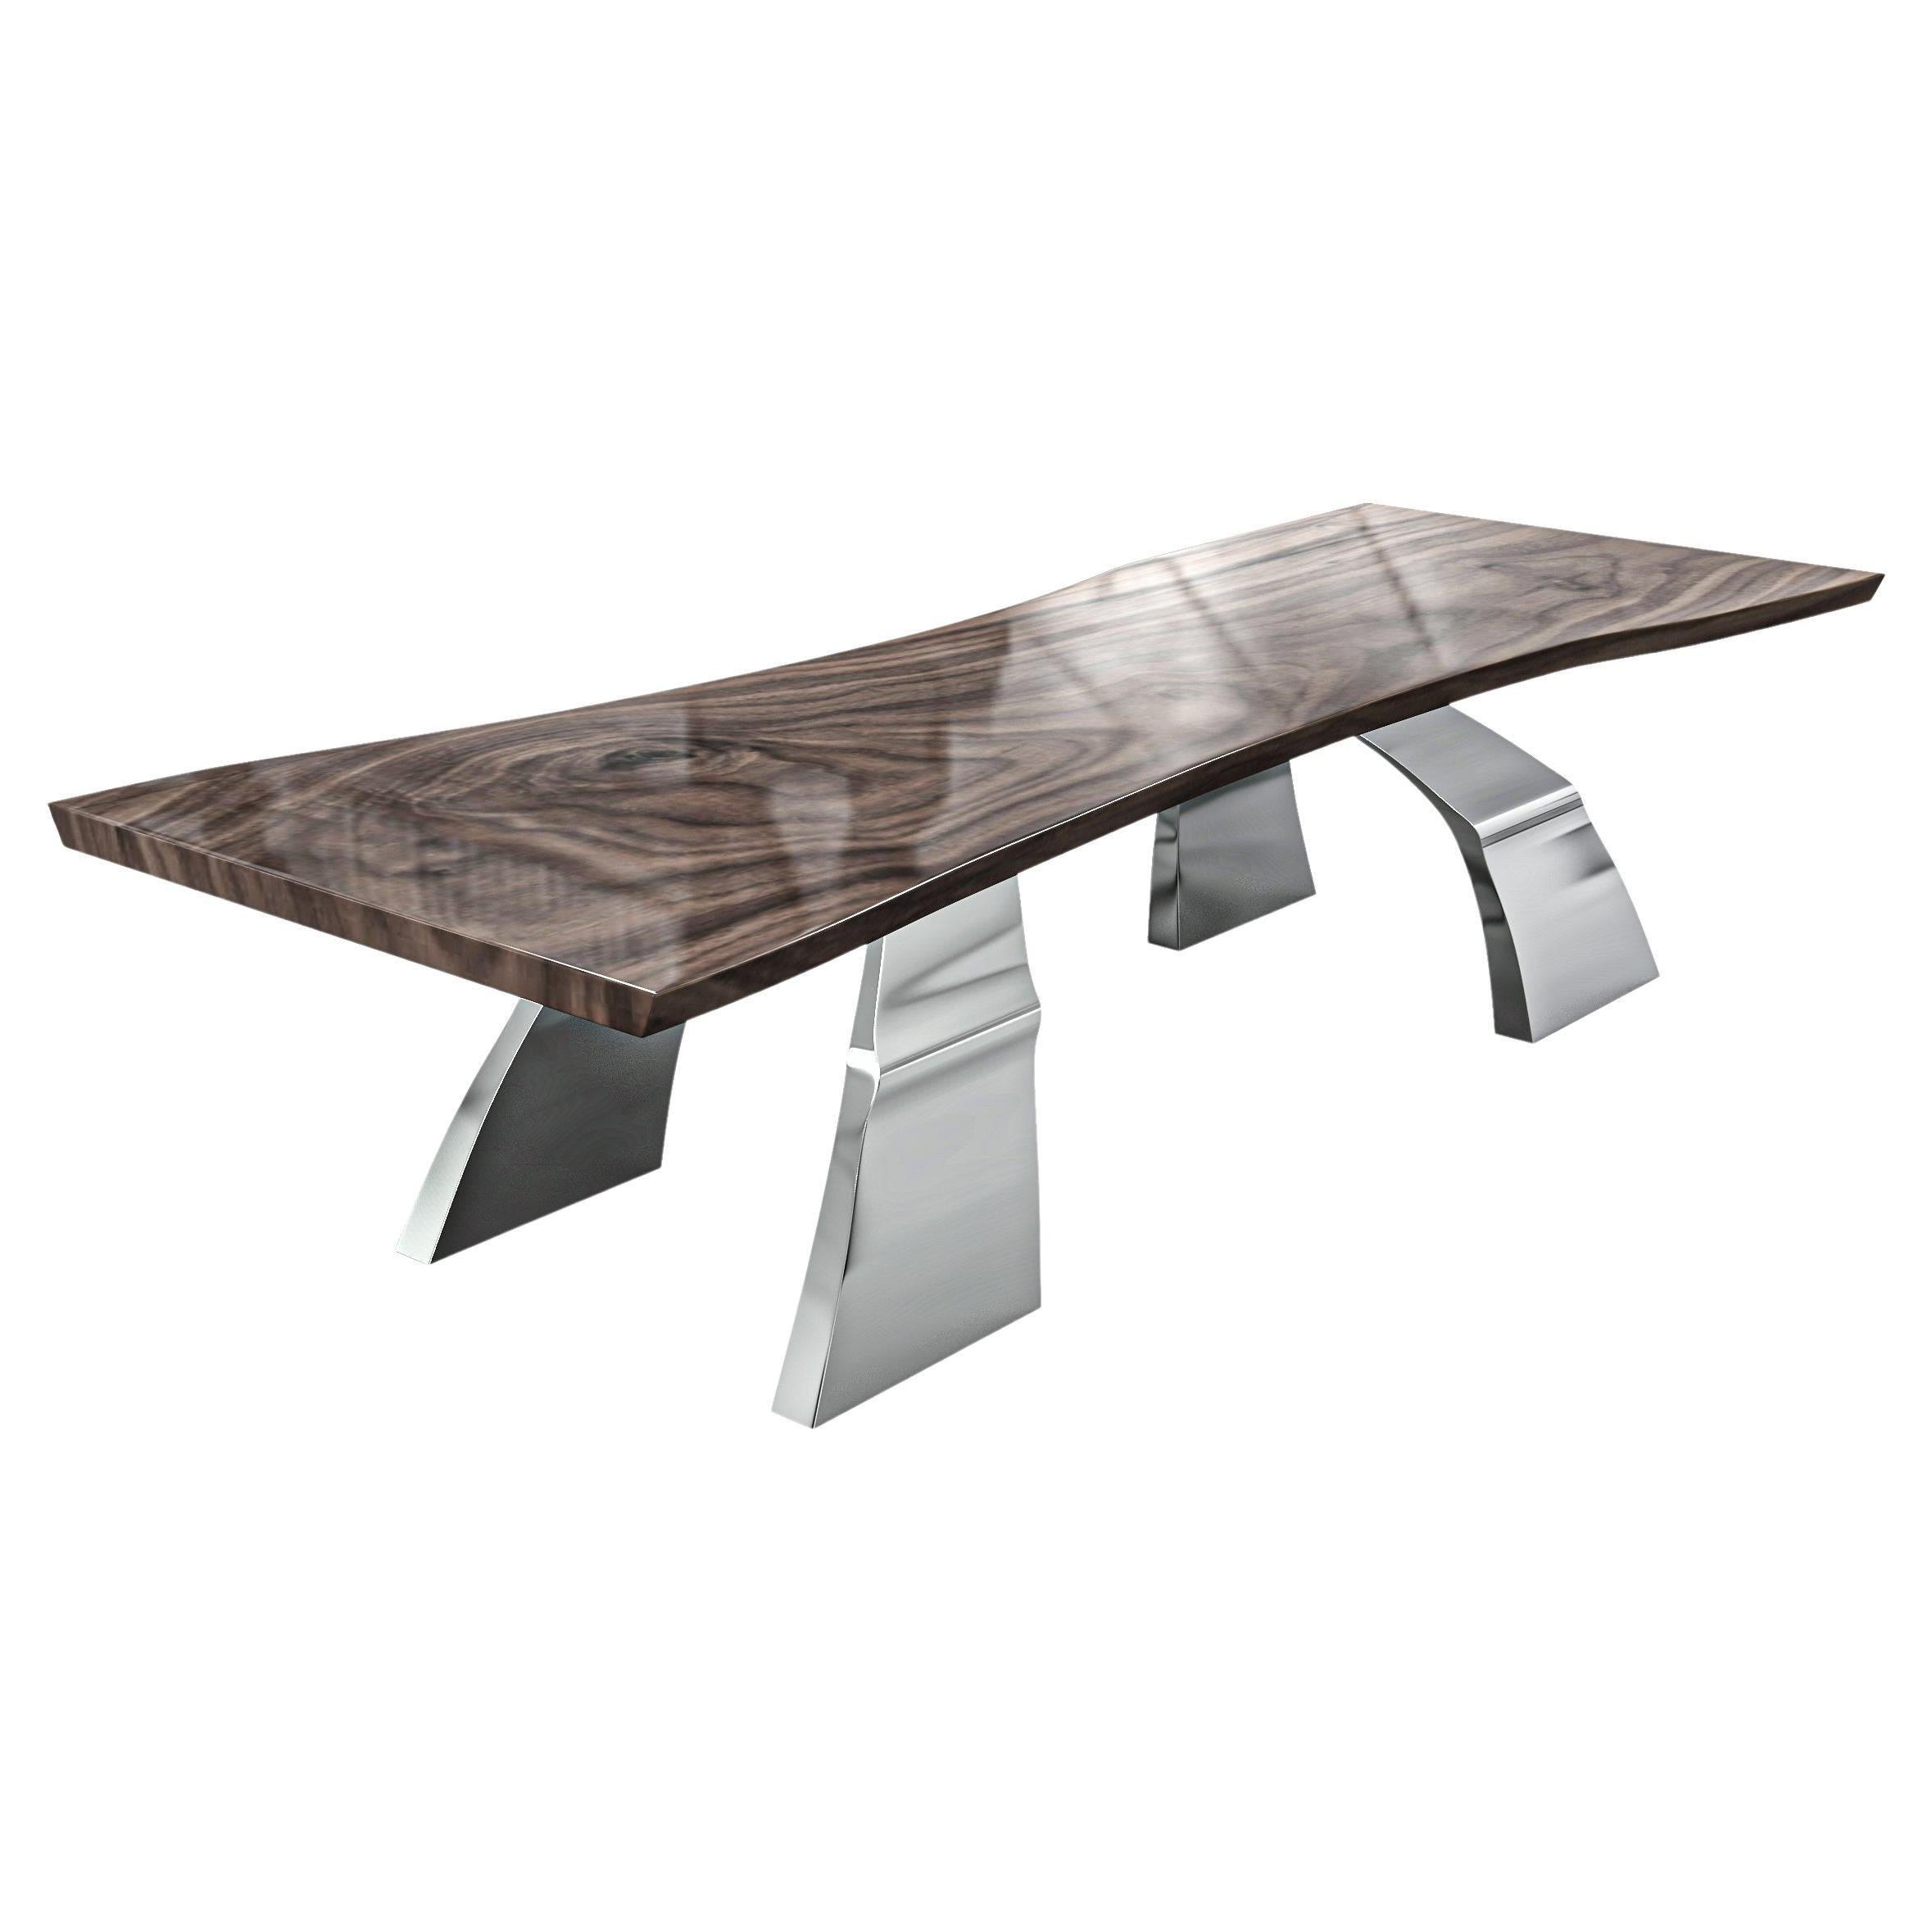 "Nuova Stradale" Dining Table with Stainless Steel and Walnut Top, Istanbul For Sale